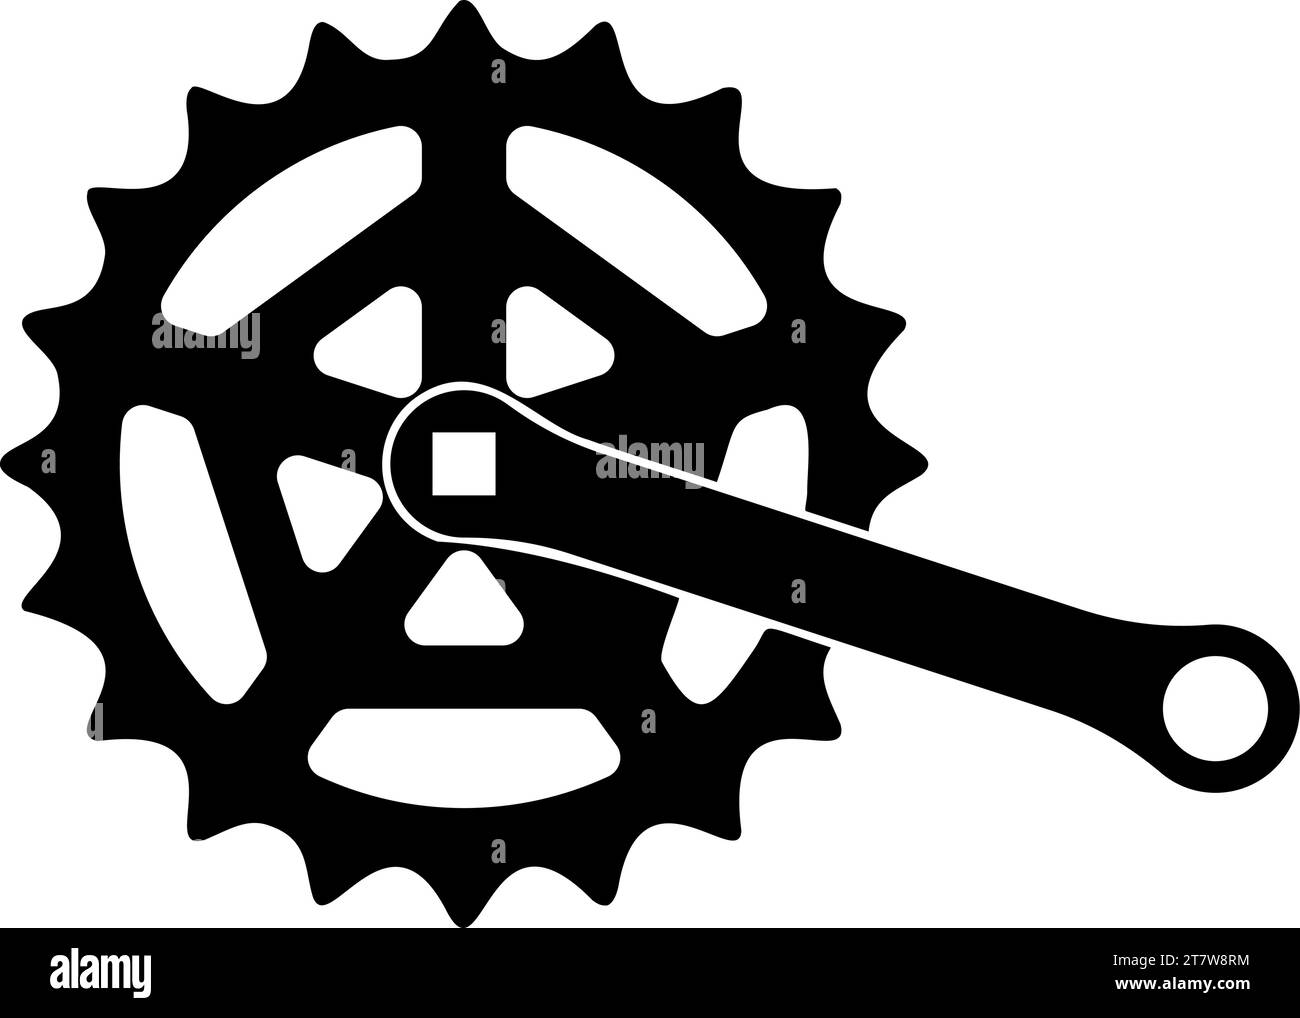 Crankset cogwheel sprocket crank length with gear for bicycle cassette system bike icon black color vector illustration image flat style simple Stock Vector